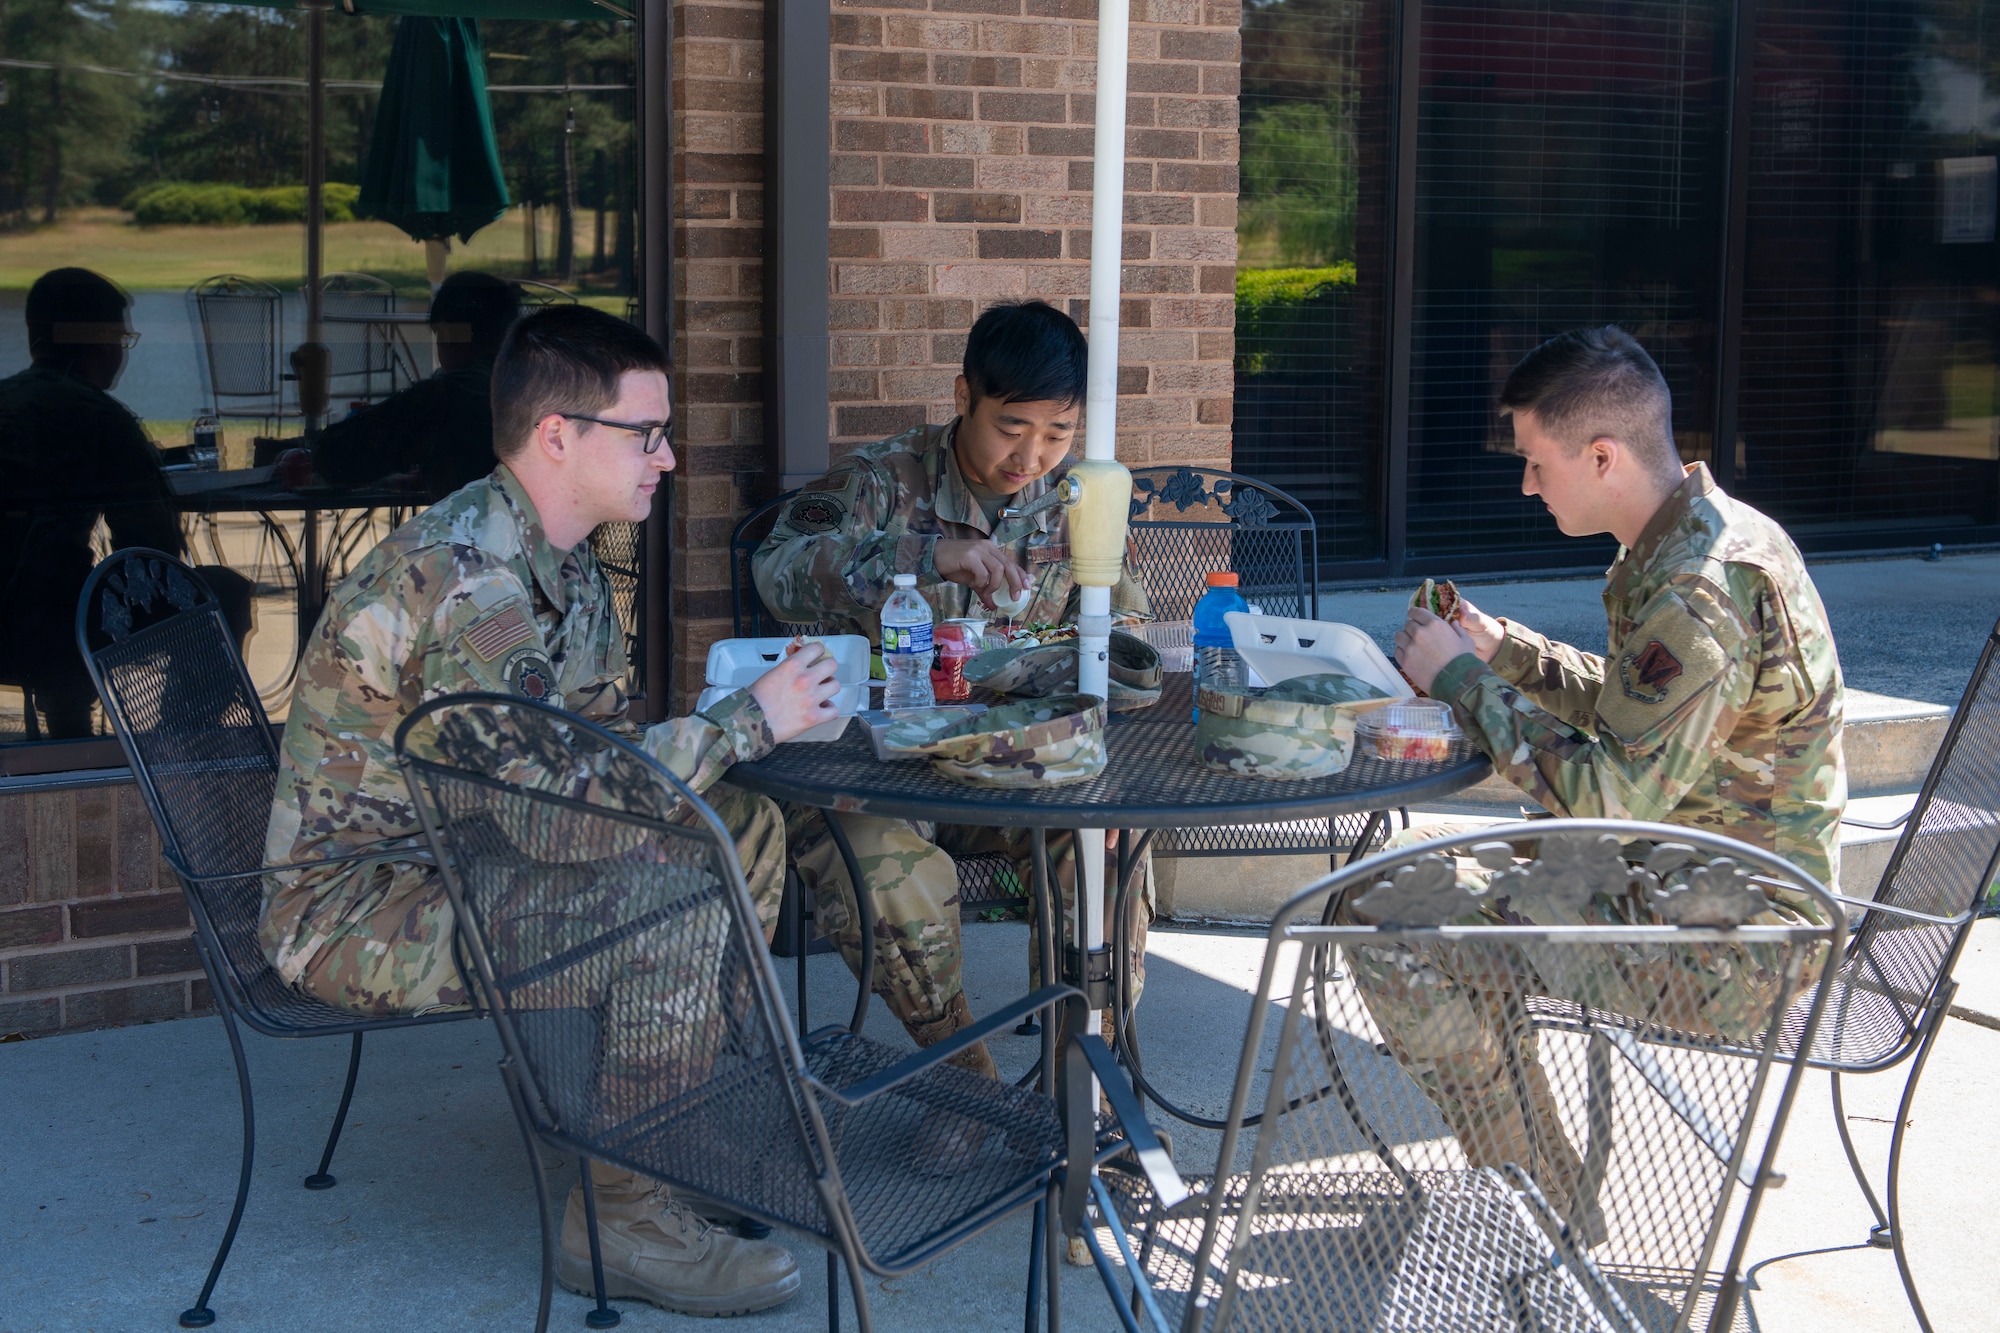 Avionics technicians from the 4th Component Maintenance Squadron eat lunch on the outdoor patio of the Compass Café at Seymour Johnson Air Force Base, North Carolina, May 13, 2021.